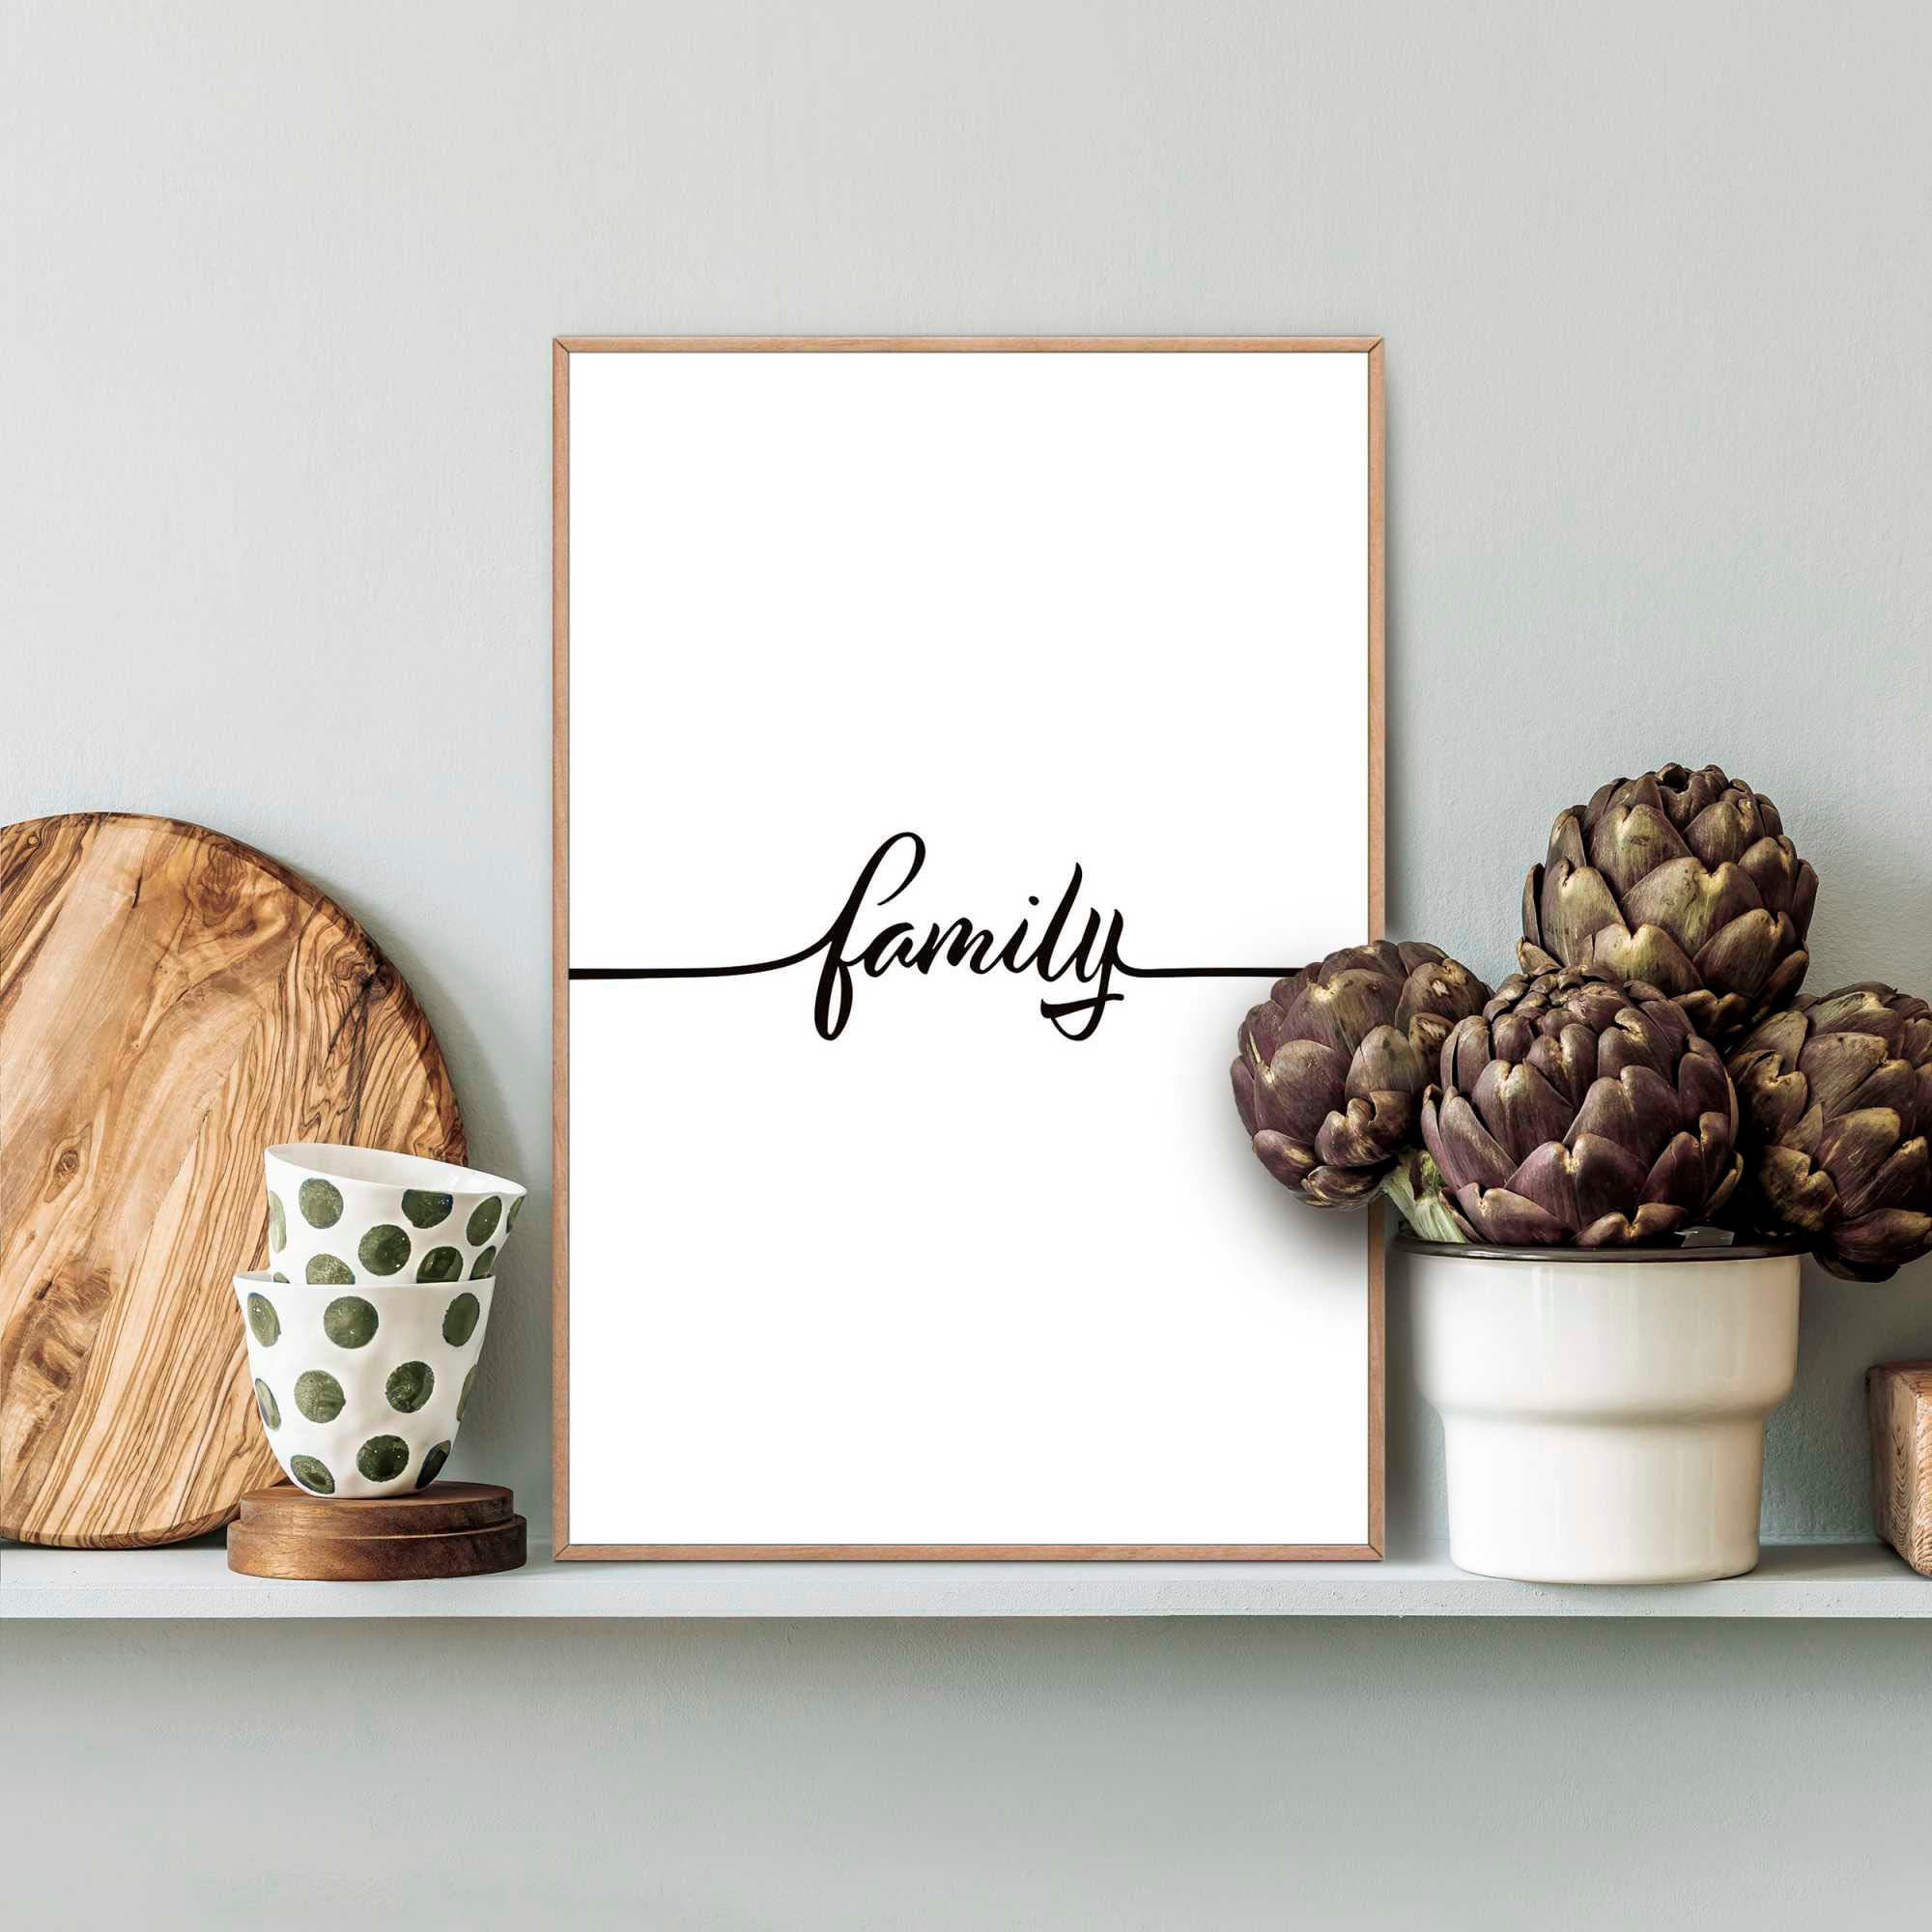 Reinders! Poster »Family« Shop im OTTO Online